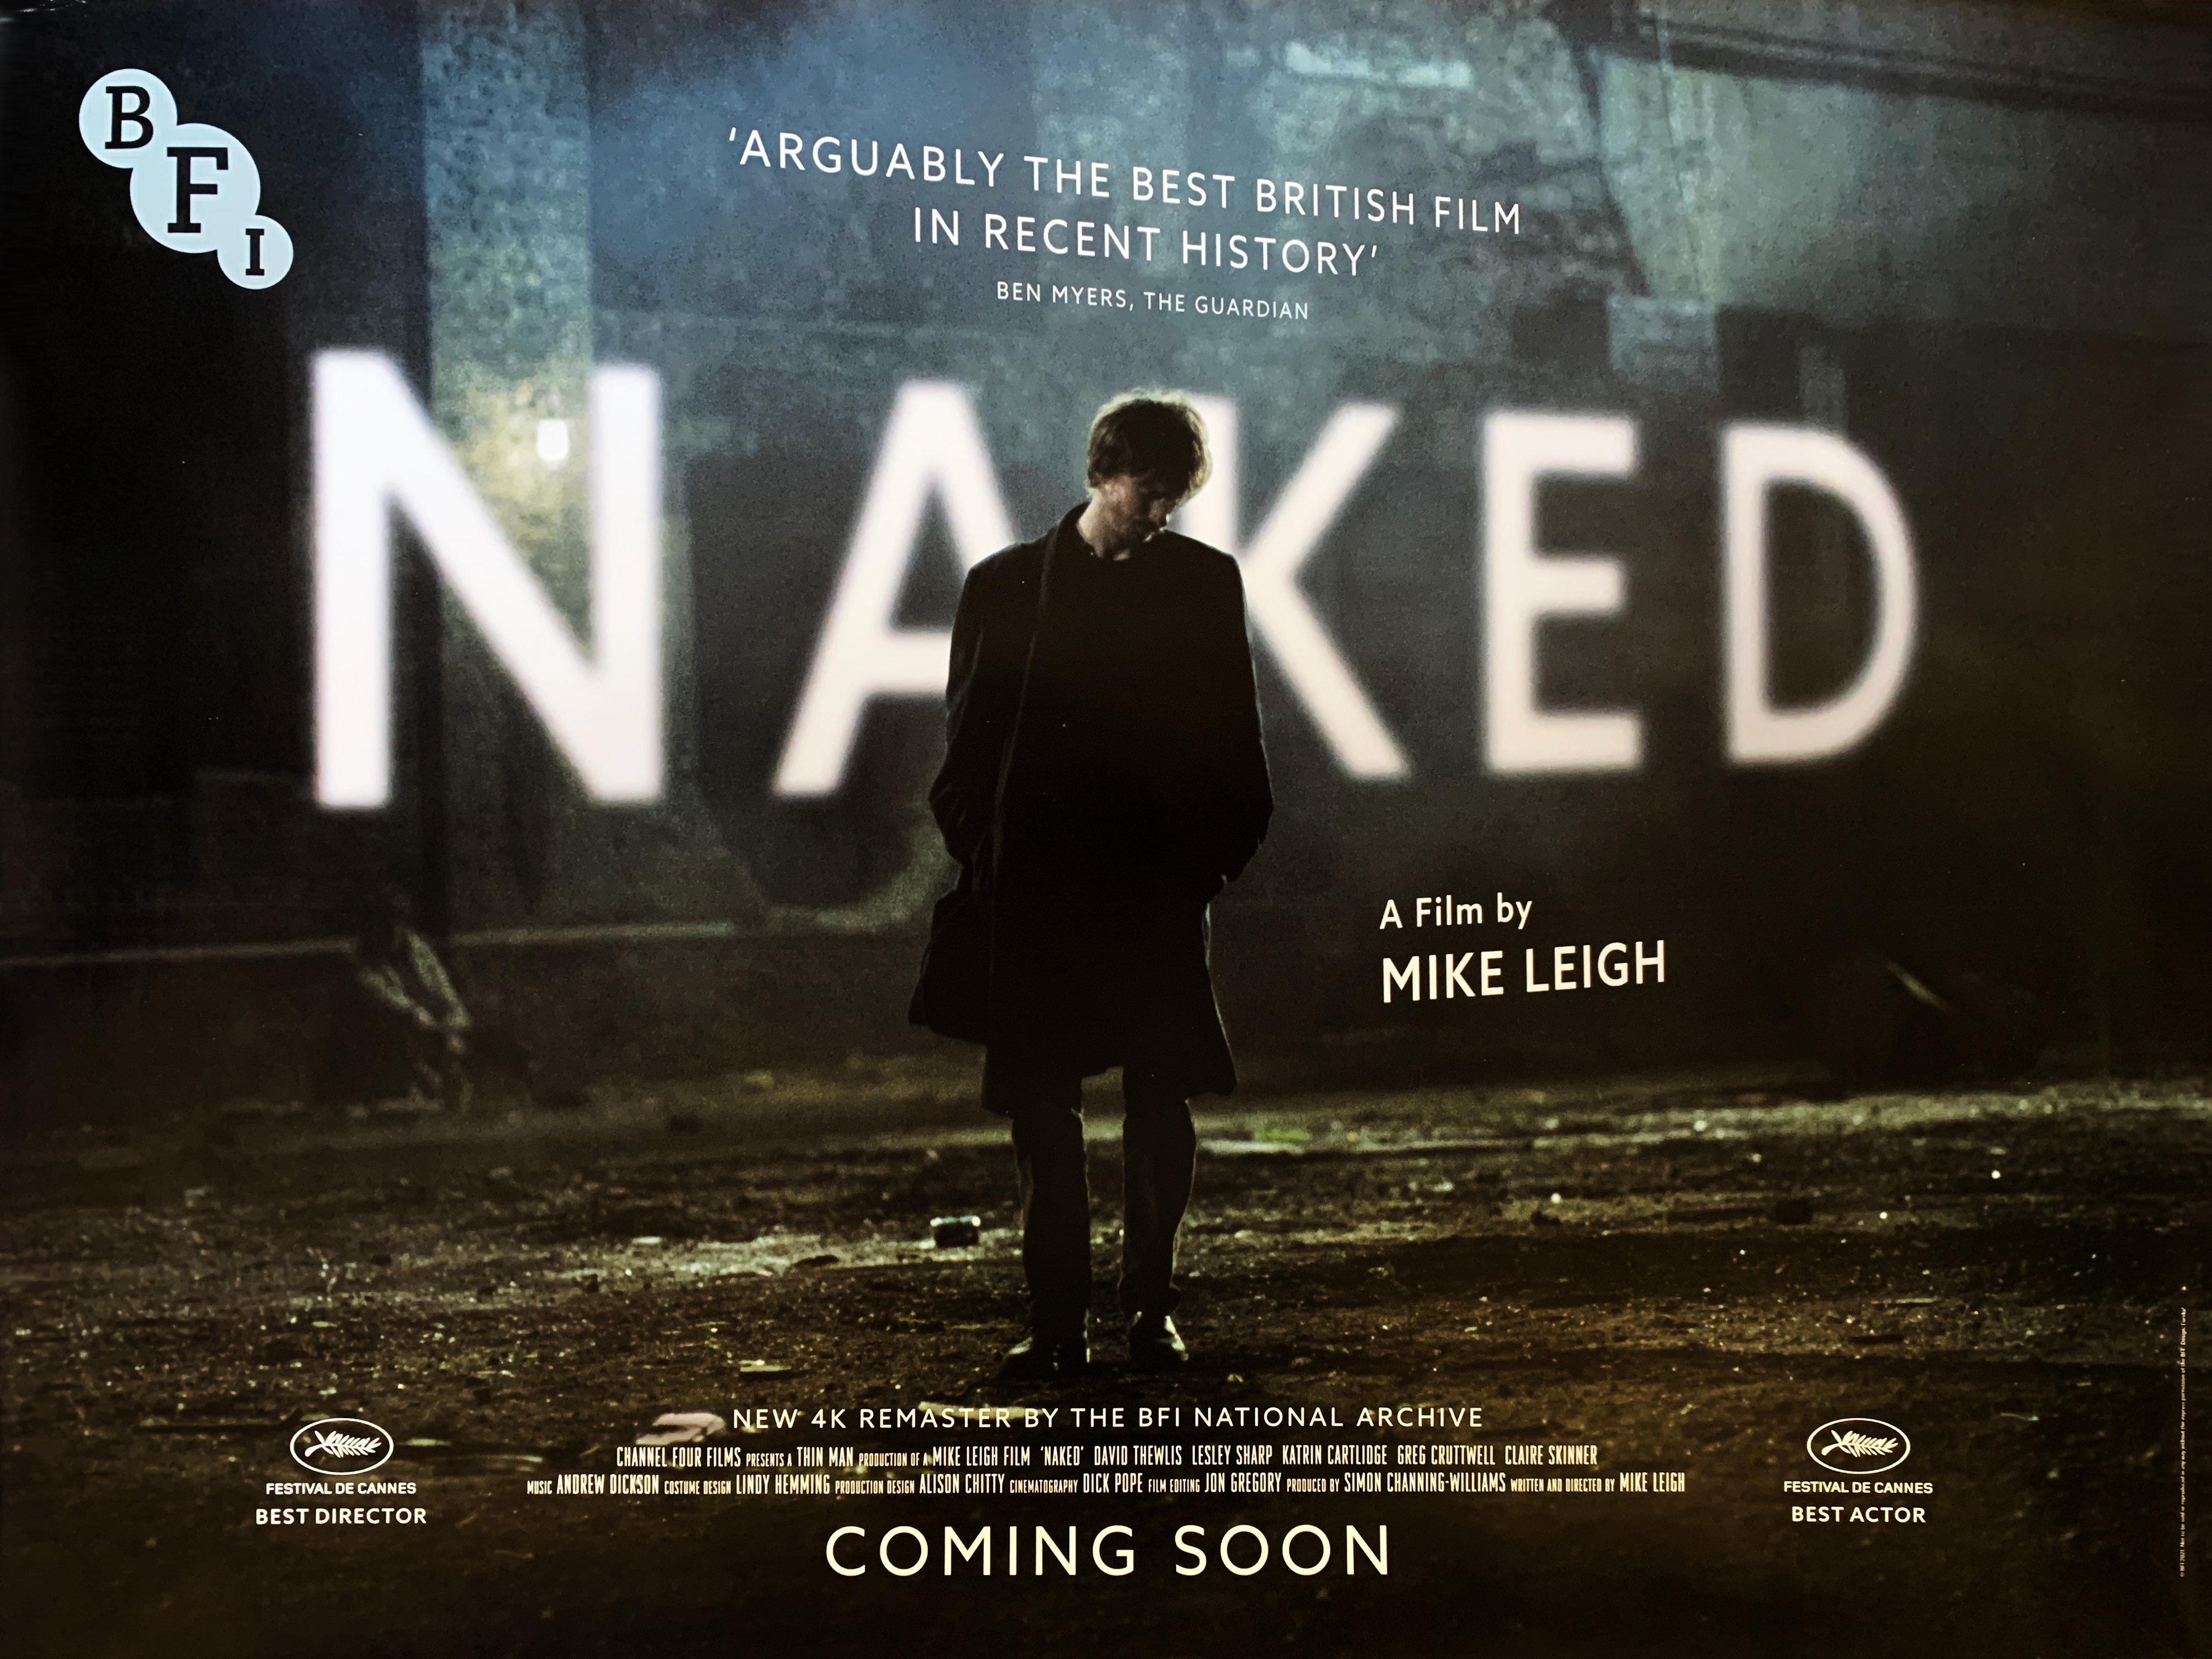 Mike Leigh's Naked movie quad poster